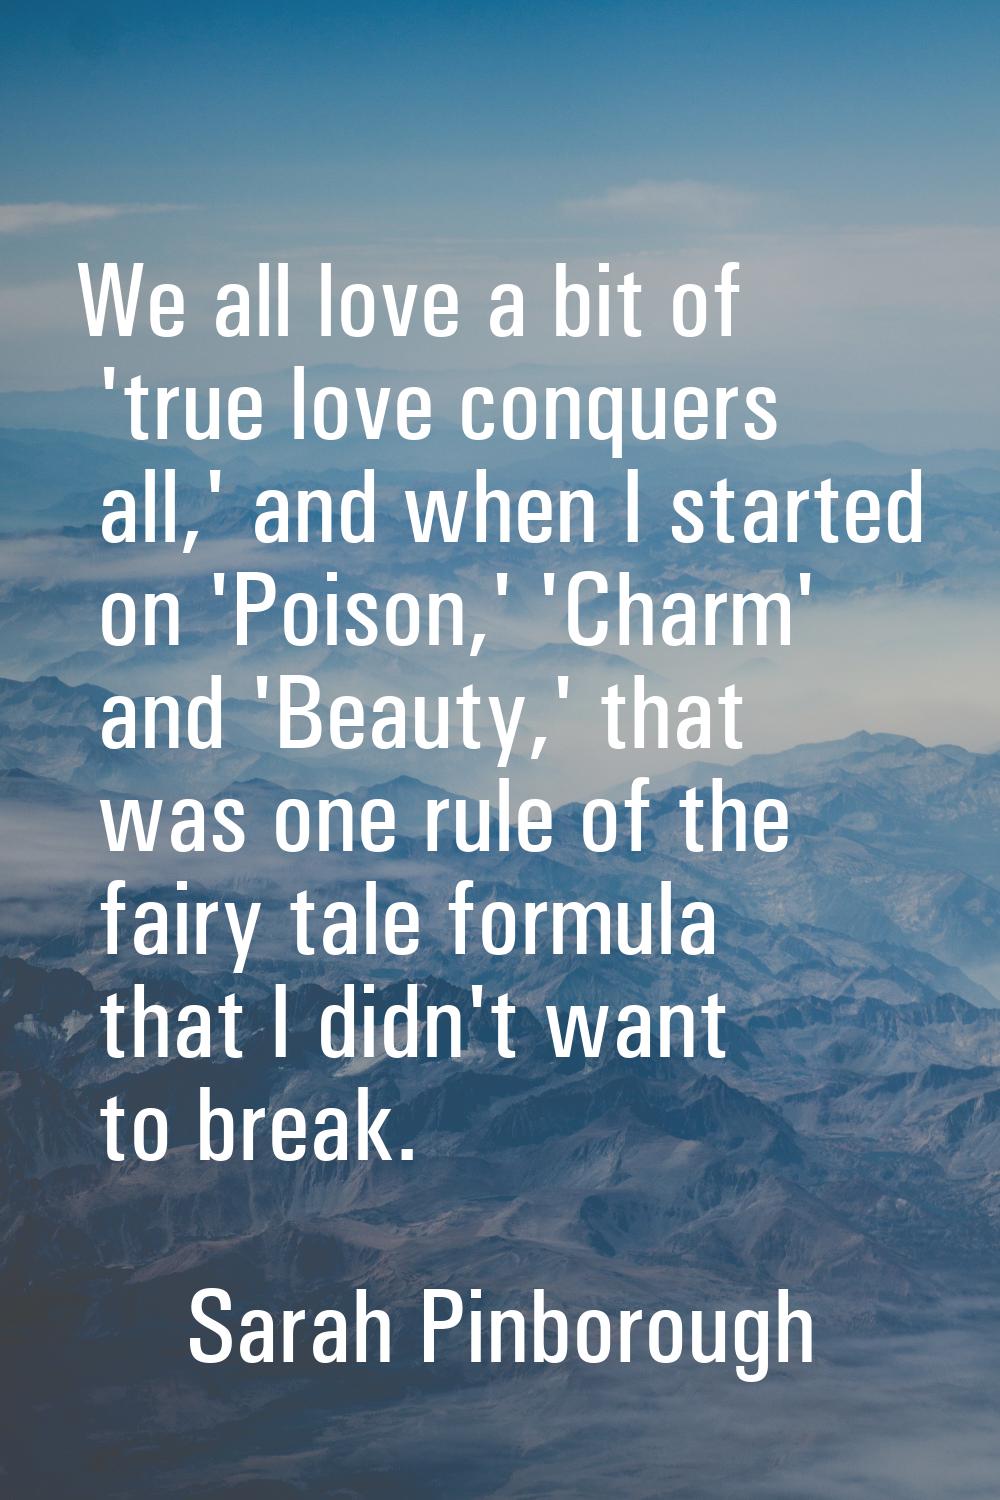 We all love a bit of 'true love conquers all,' and when I started on 'Poison,' 'Charm' and 'Beauty,